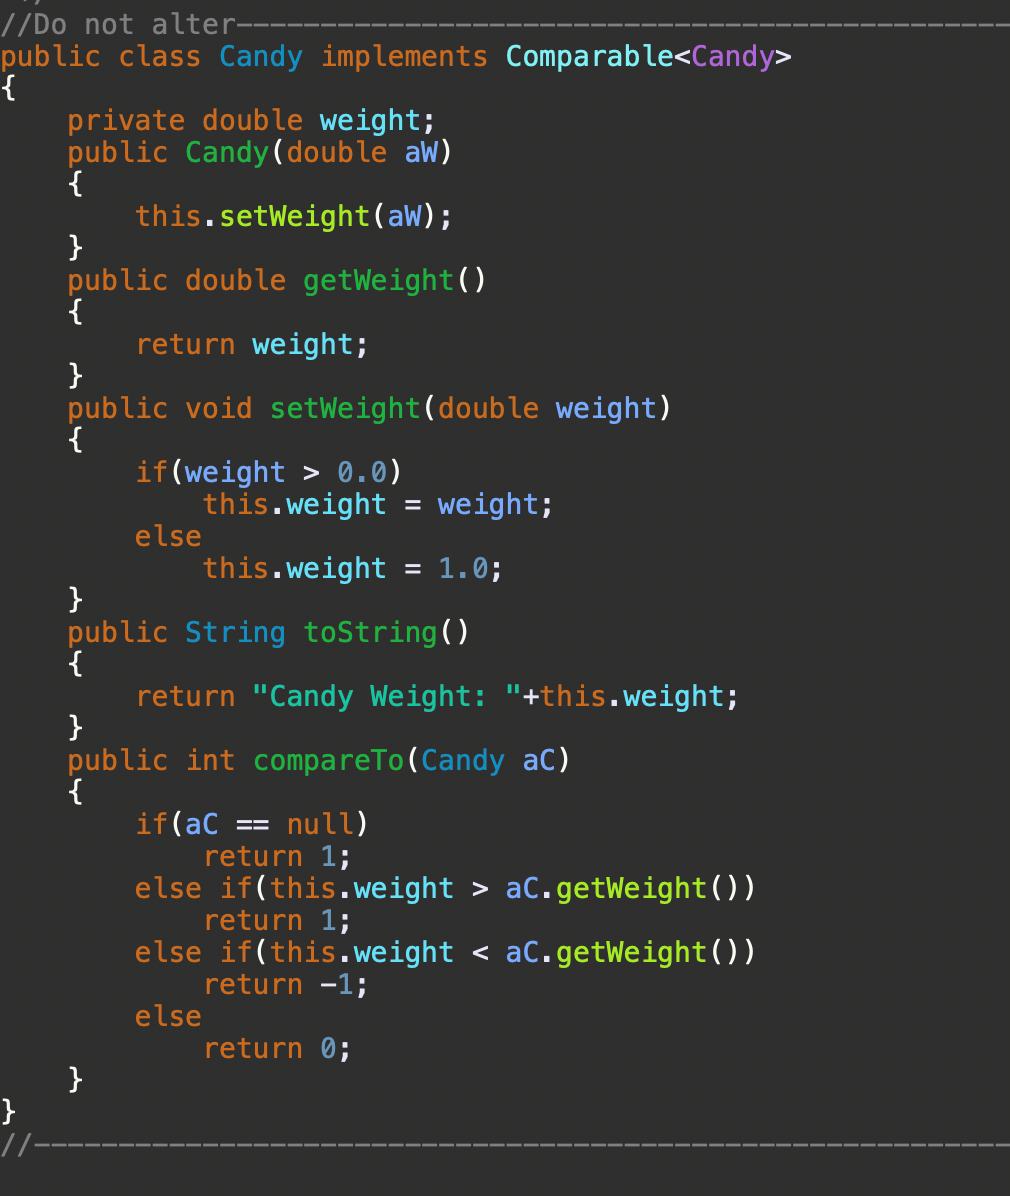 //Do not alter-
public class Candy implements Comparable<Candy>
{
private double weight;
public Candy (double aW)
{
this.setWeight(aw);
}
public double getWeight()
{
return weight;
}
public void setWeight(double weight)
{
if(weight > 0.0)
this.weight = weight;
else
this.weight = 1.0;
}
public String toString()
{
return "Candy Weight: "+this.weight;
}
public int compareTo(Candy aC)
{
if(aC
return 1;
else if(this.weight > aC.getWeight())
return 1;
else if(this.weight < aC.getWeight())
return -1;
else
= null)
return 0;
}
}
